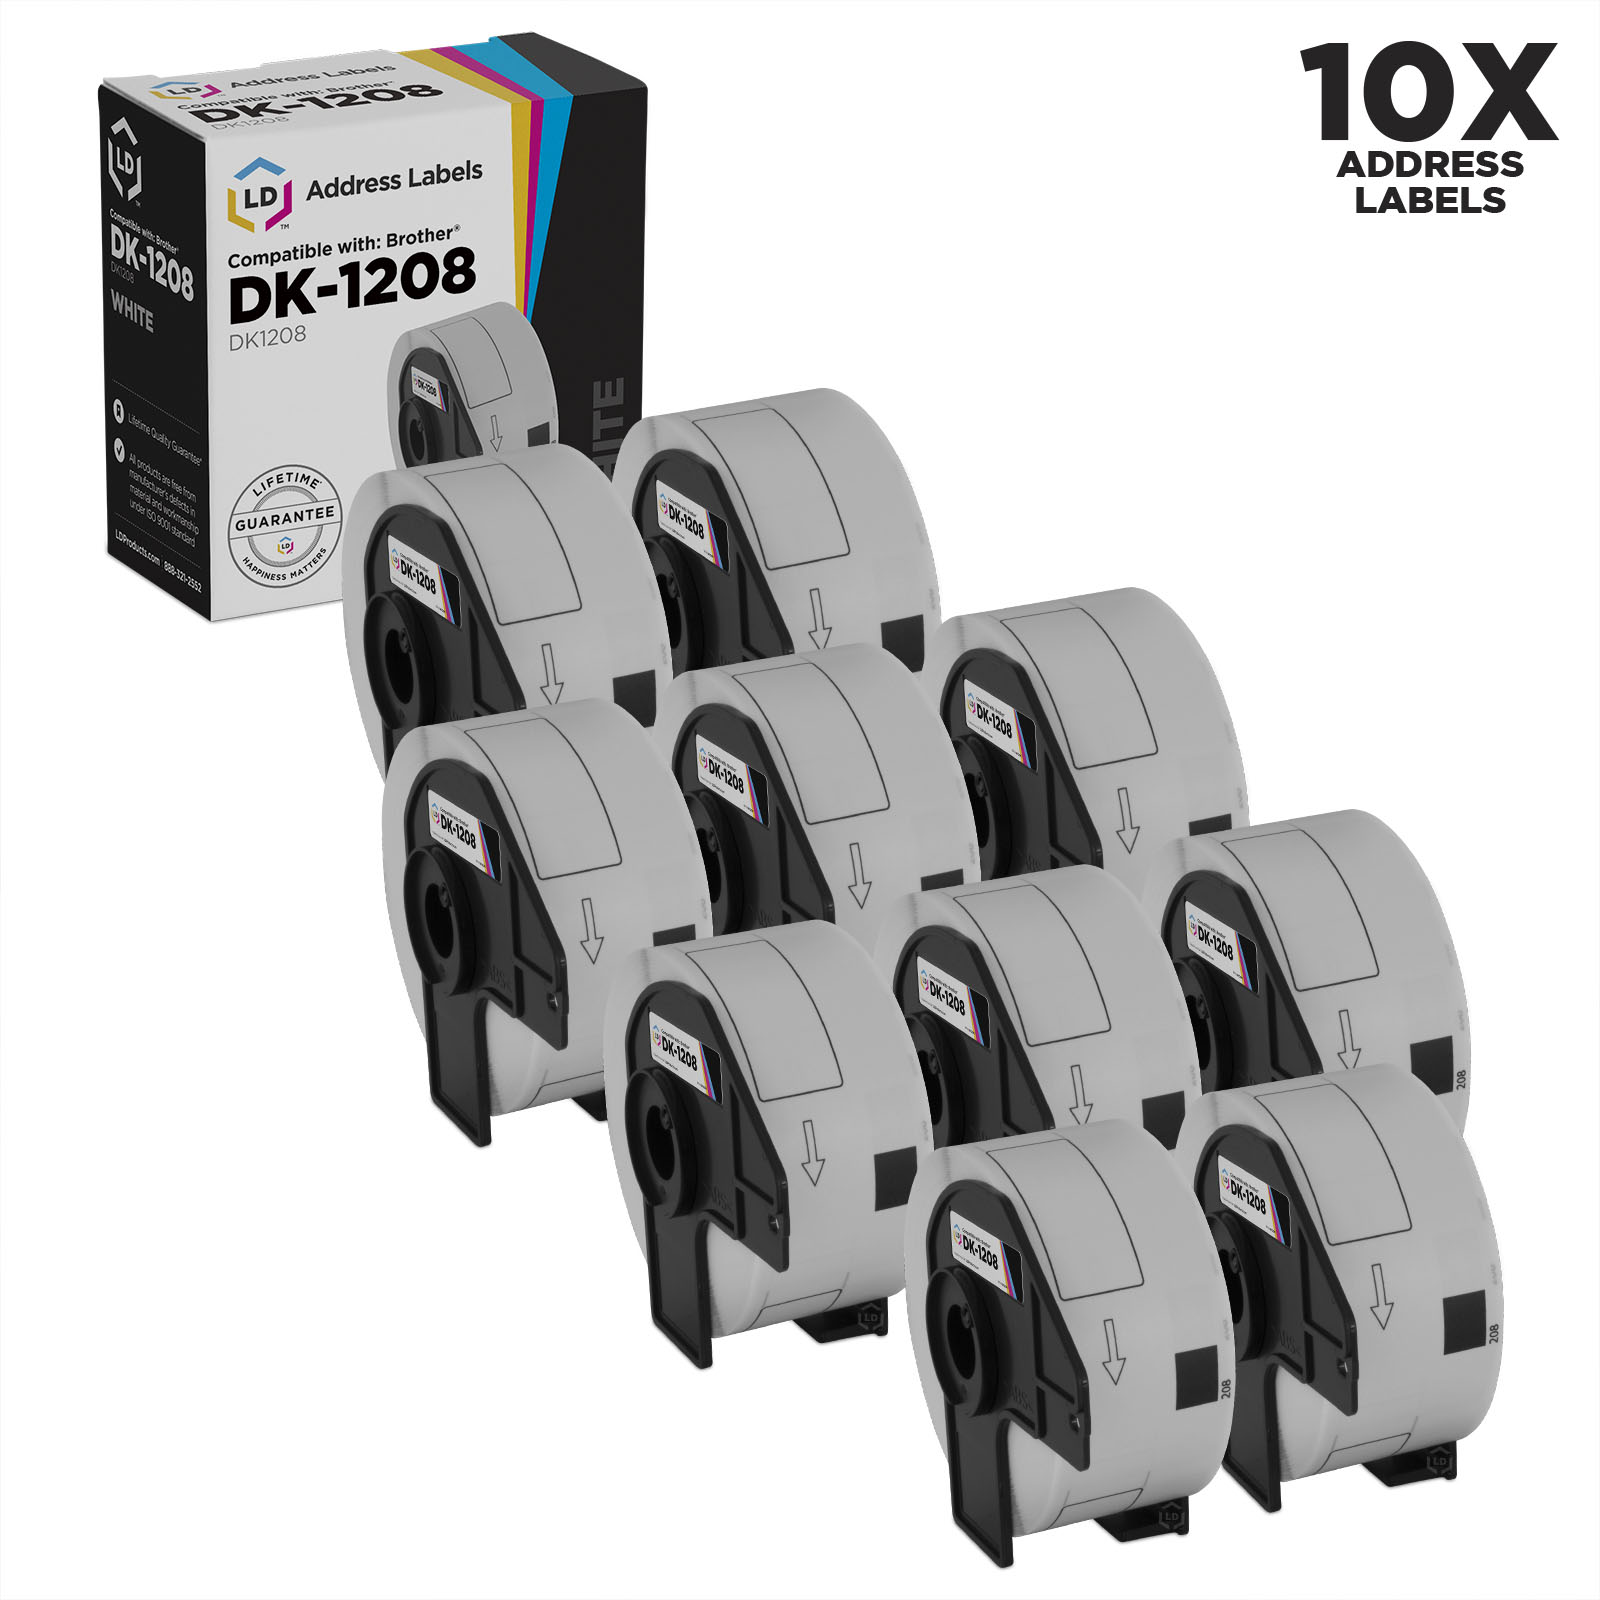 LD Compatible Address Label Replacement for DK-1208 1.4 in x 3.5 in (400 Labels, 10-Pack, White) - image 1 of 1